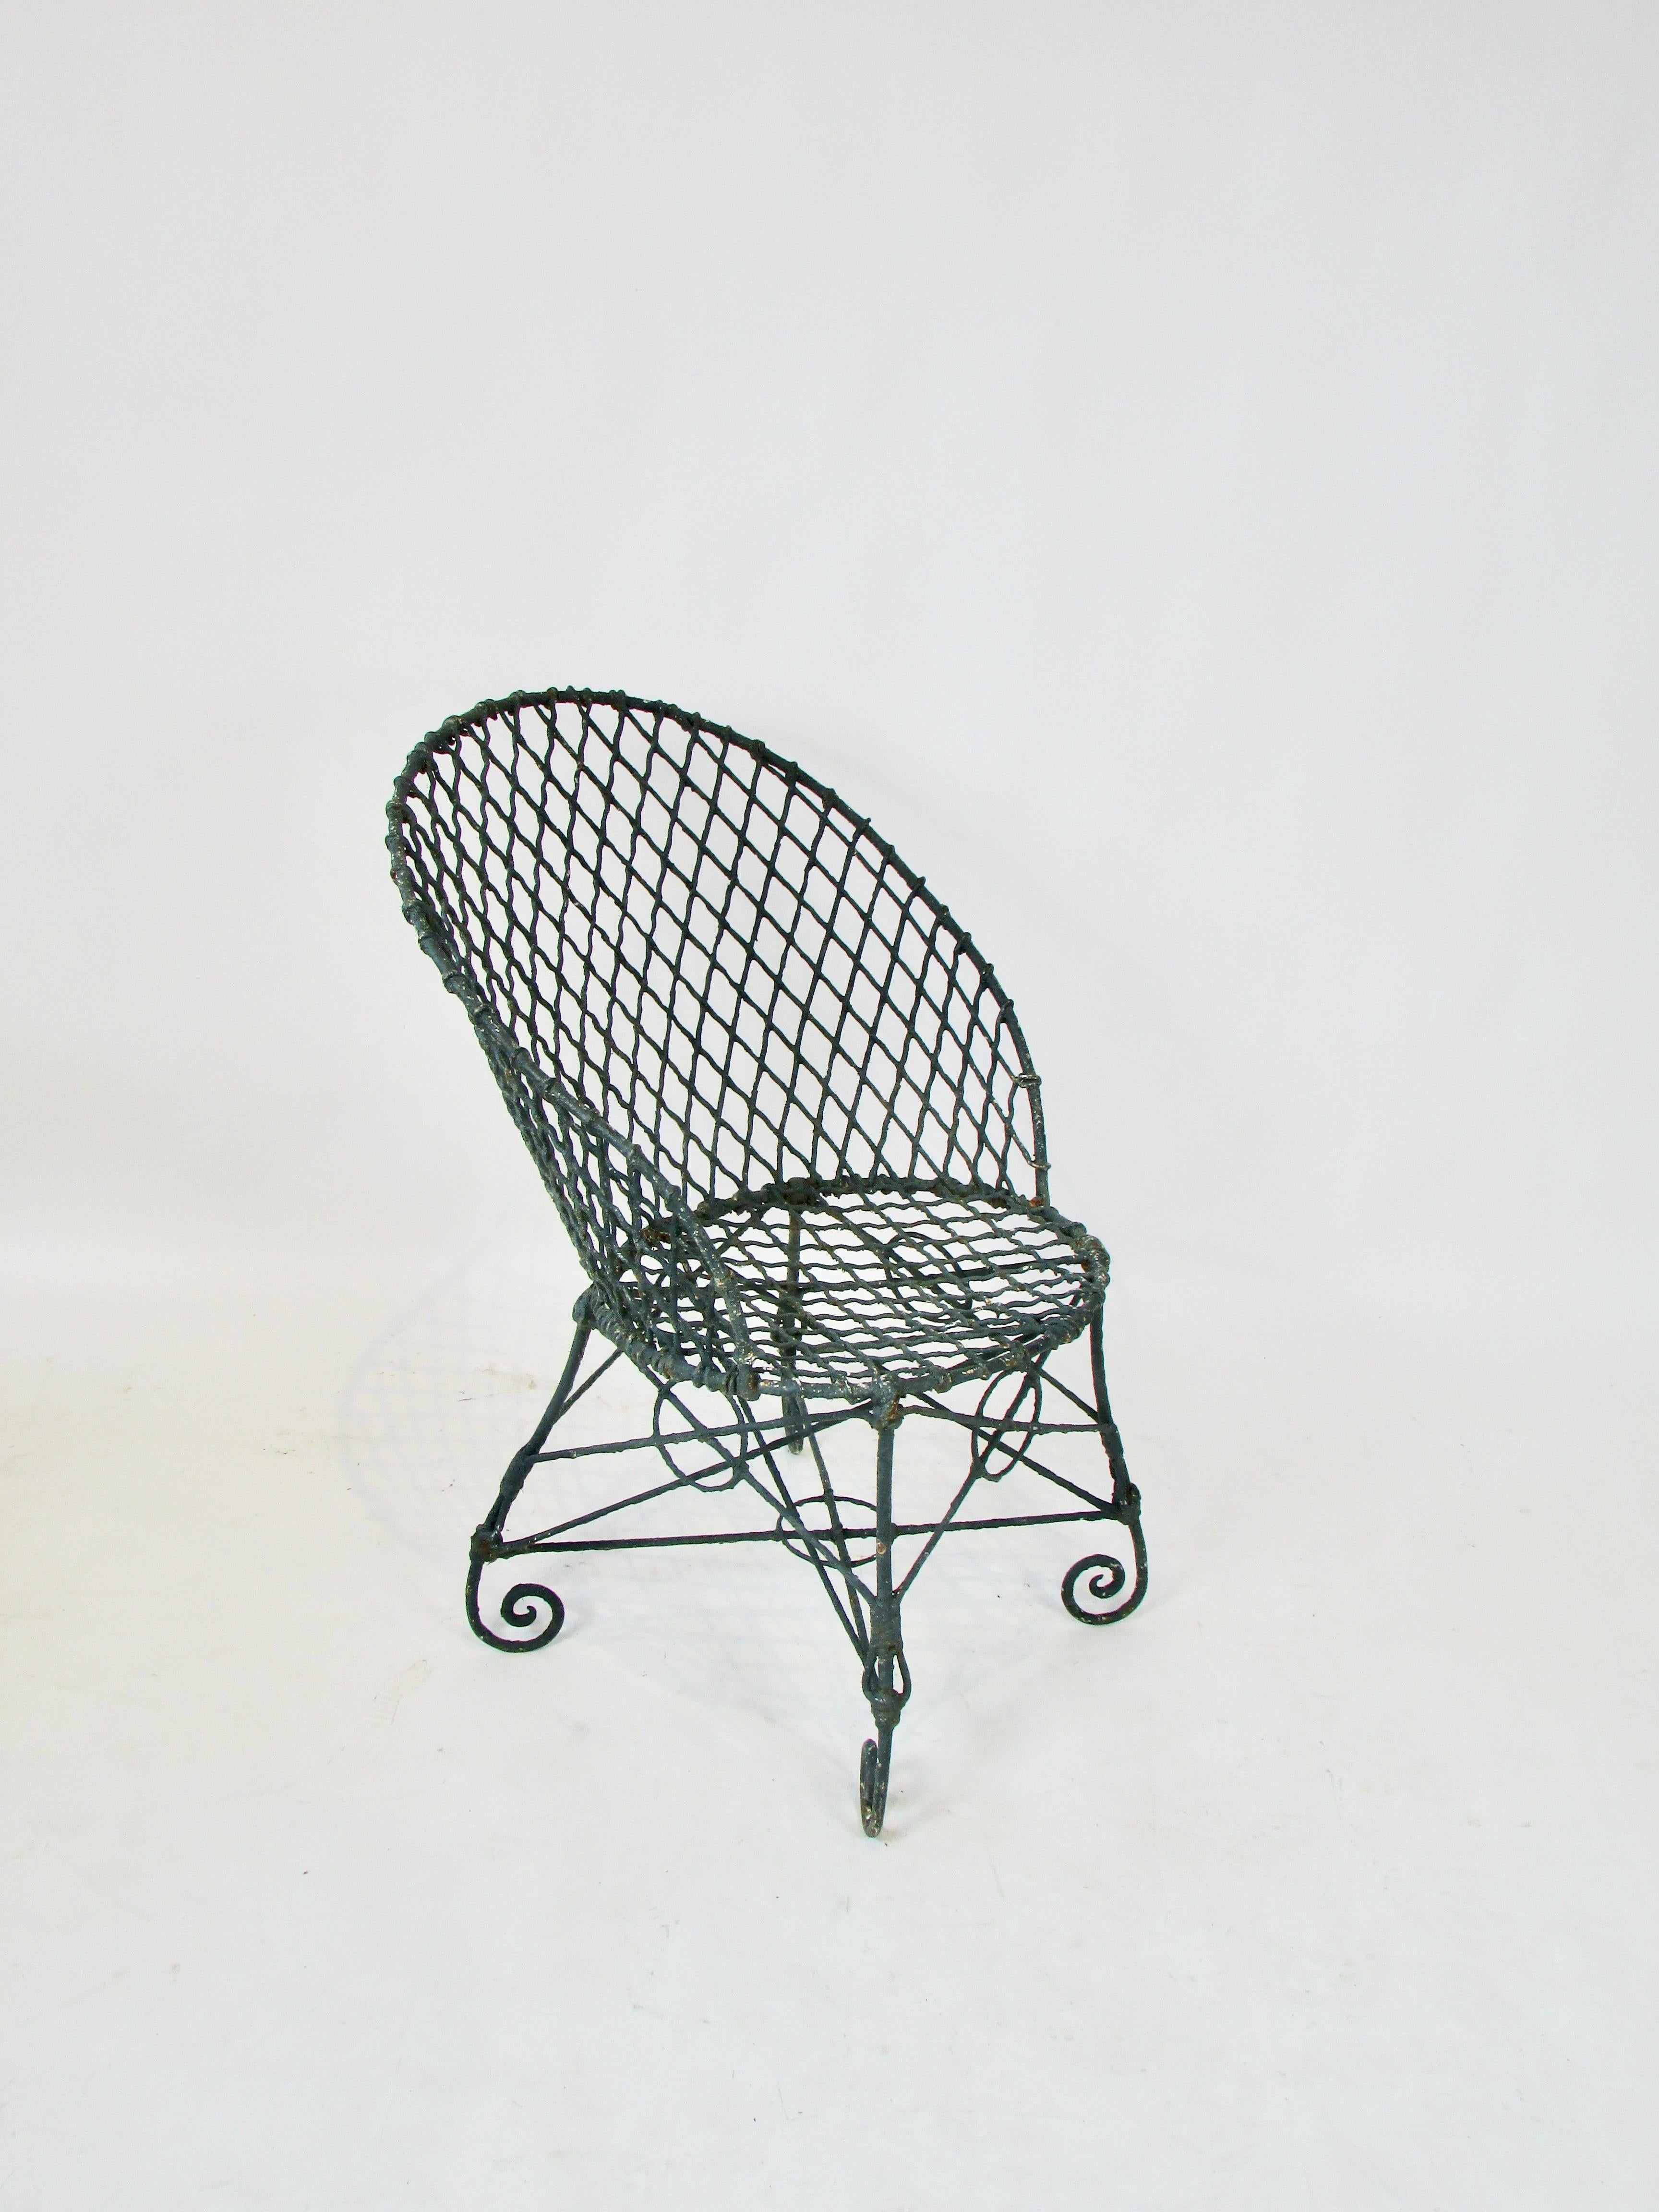 Early 20th century wire chair . Wrought iron frame with scrolled feet holds fine intricate wire work frame . Chair probably has many layers of paint . Current color applied years ago has a green tint to it . Plenty of rust and patina as shown .